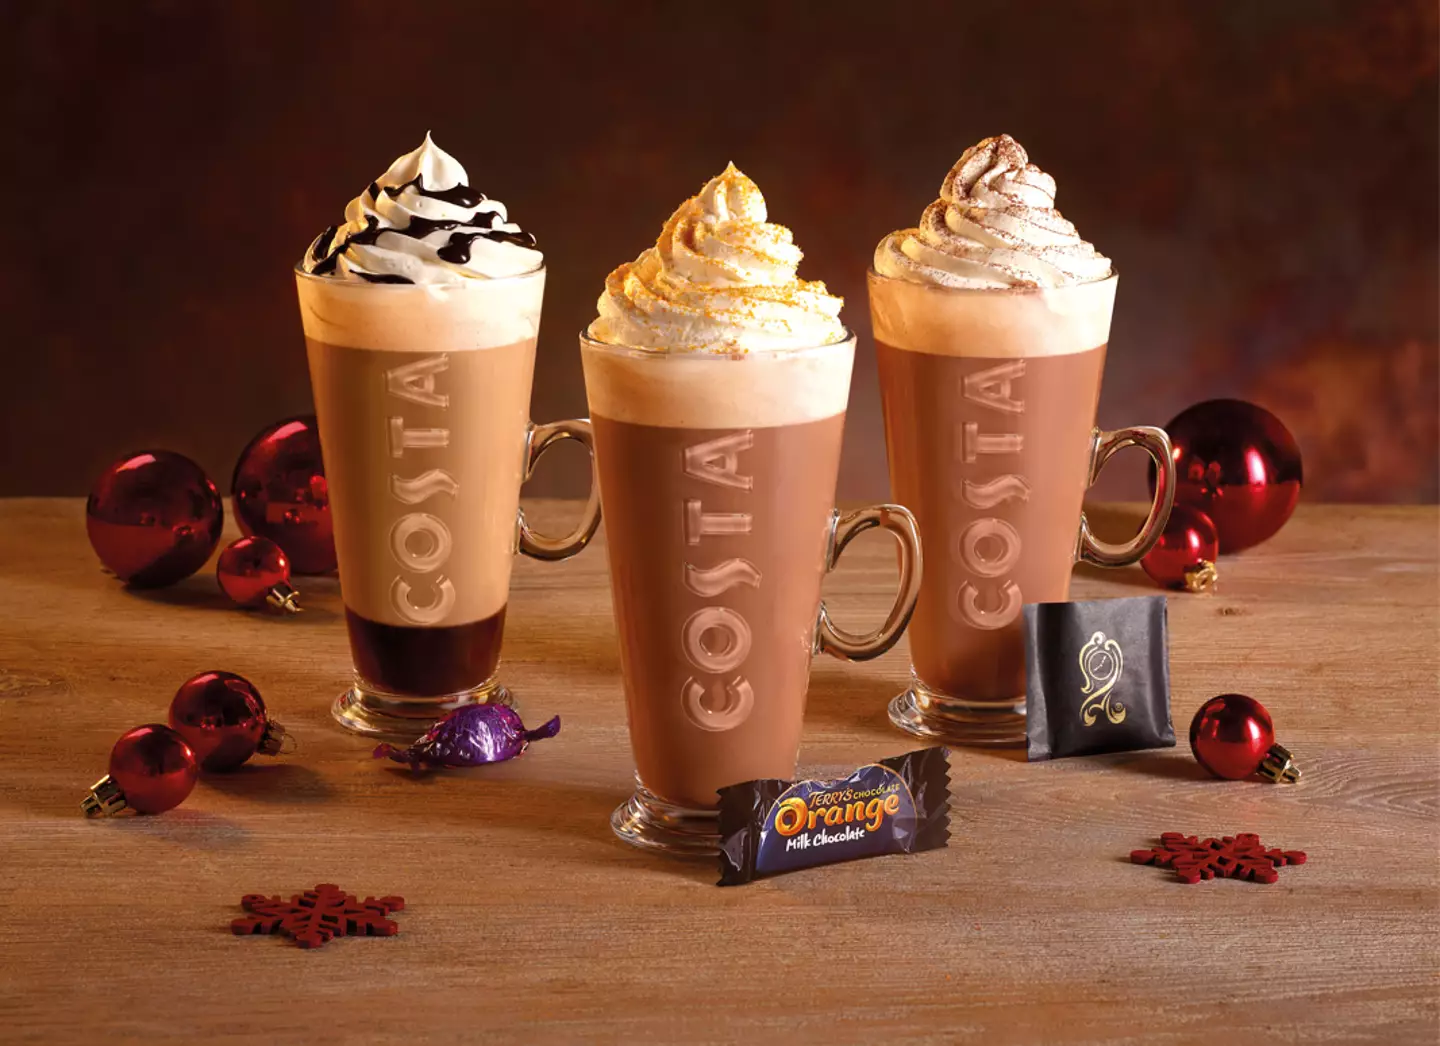 Costa has an array of festive drinks to try out (